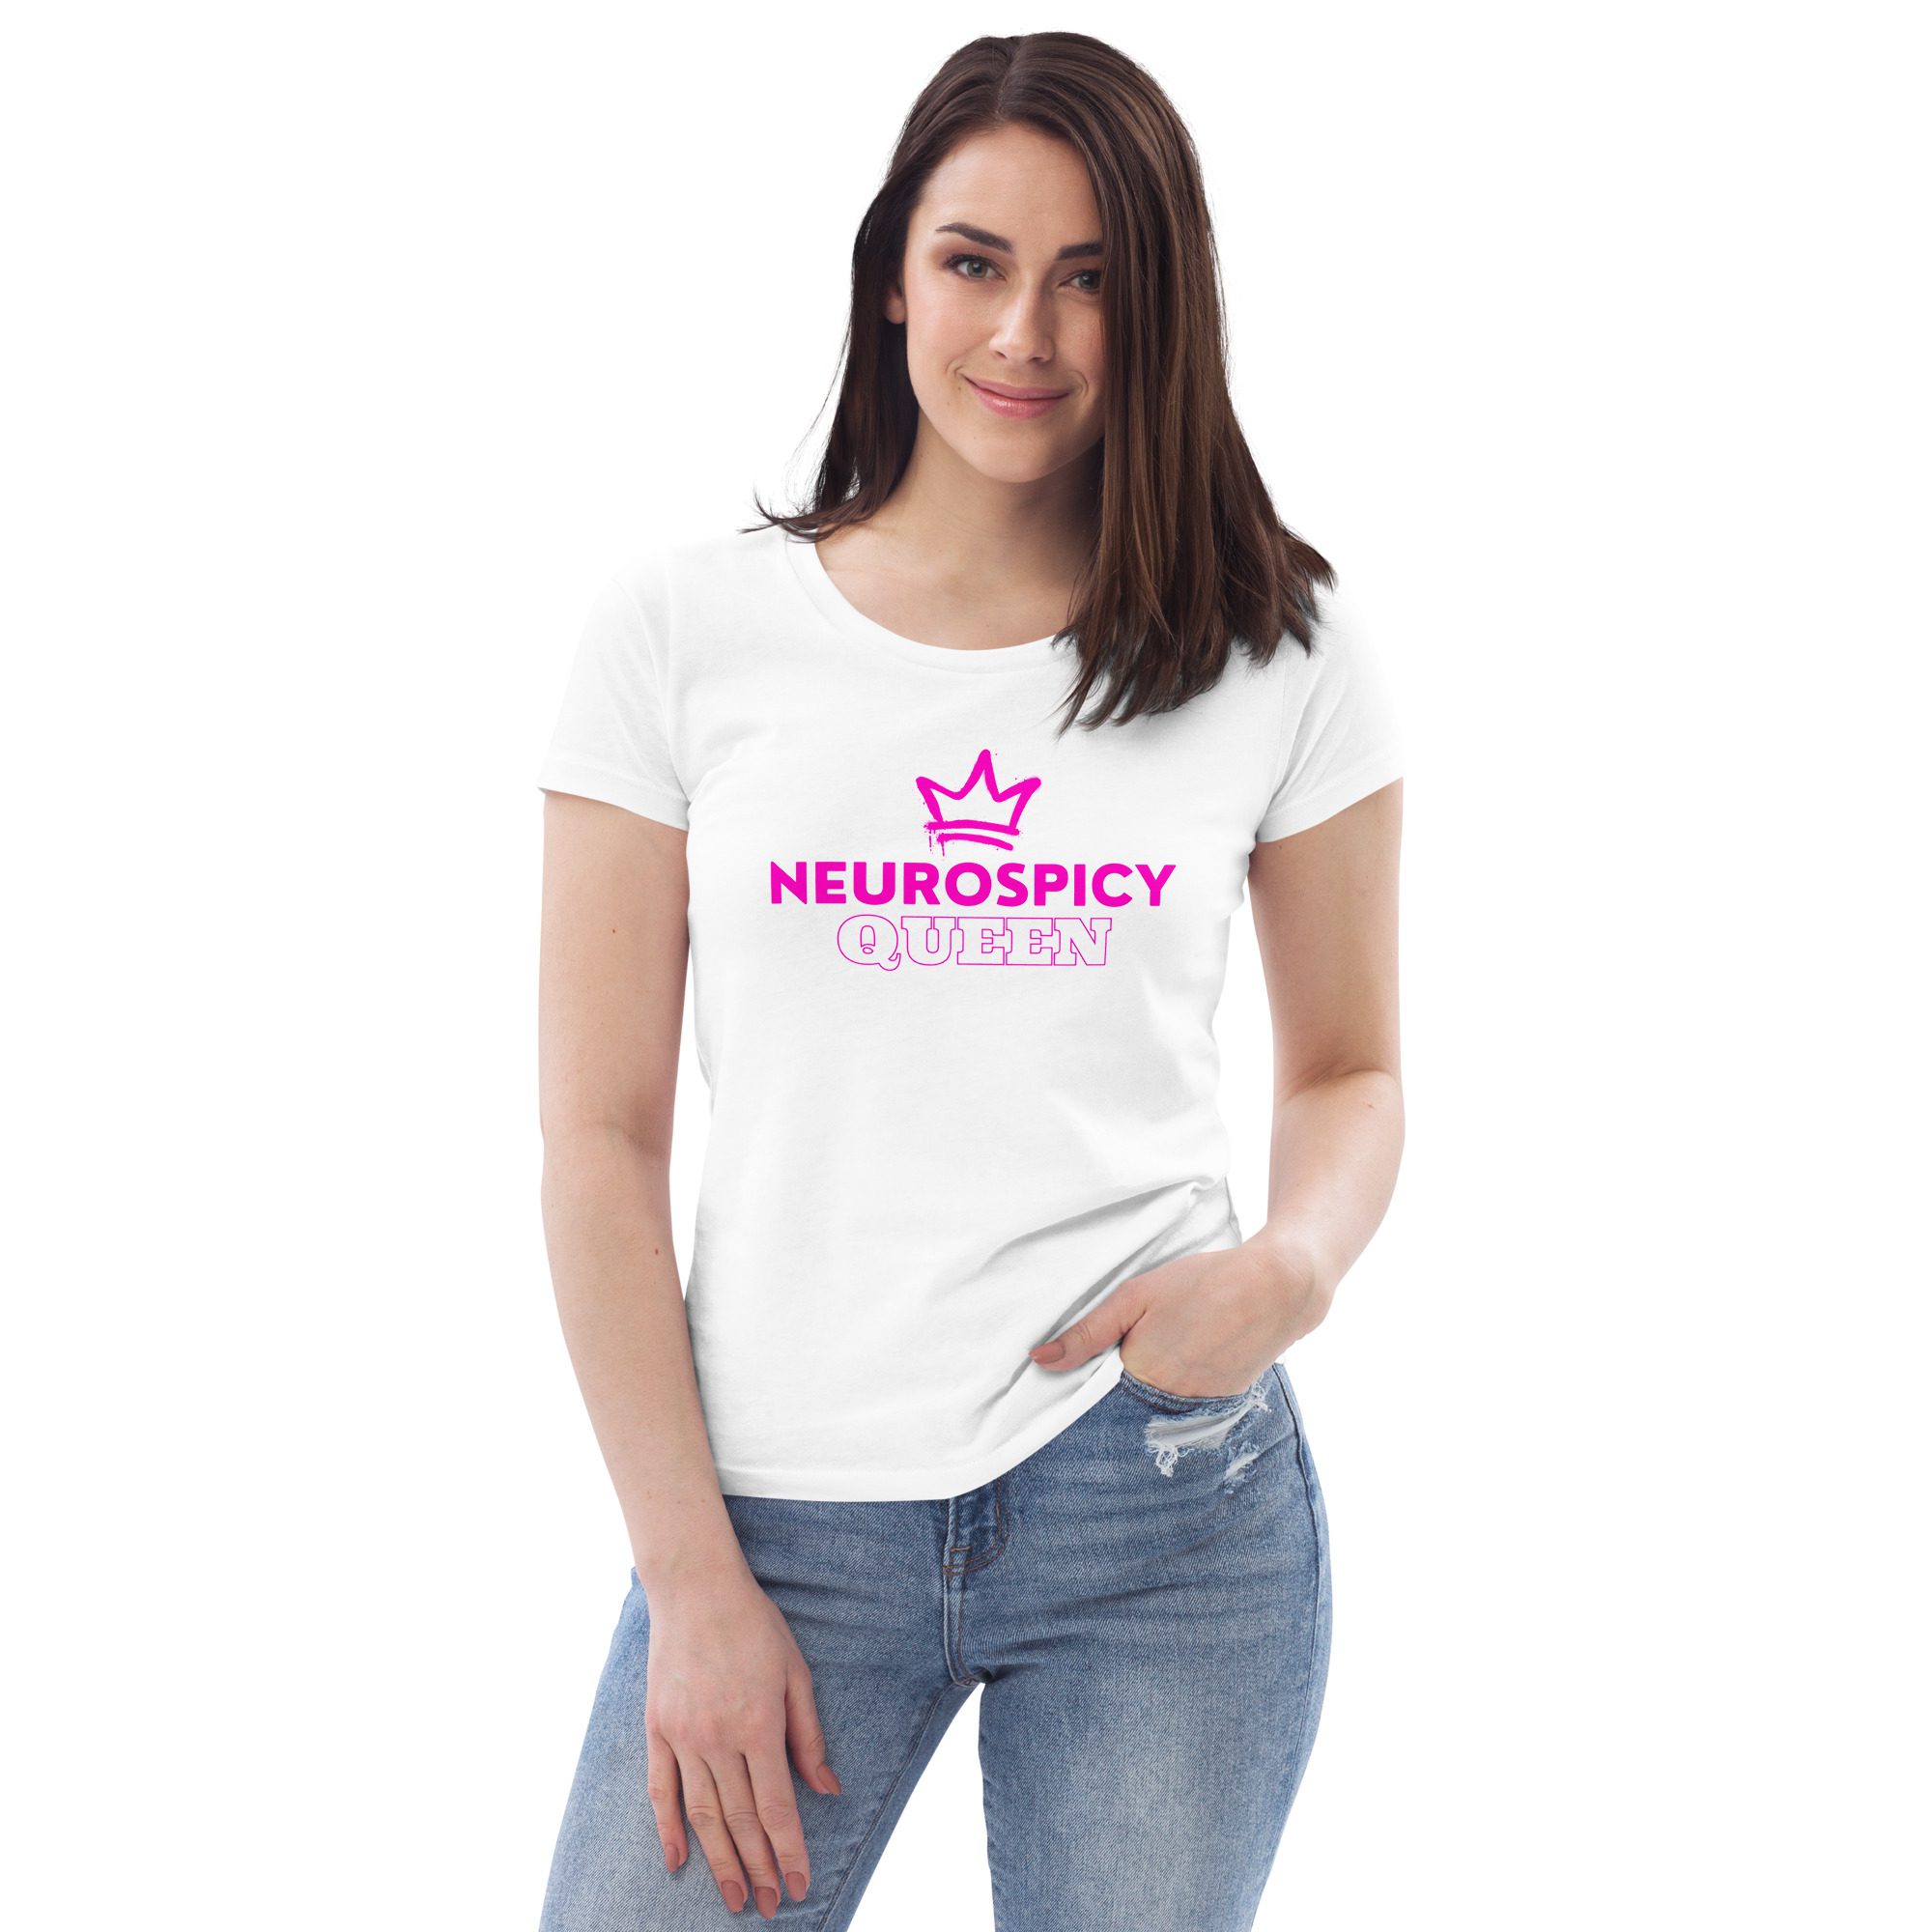 Neurospicy Queen Women's Fitted Eco T-shirt